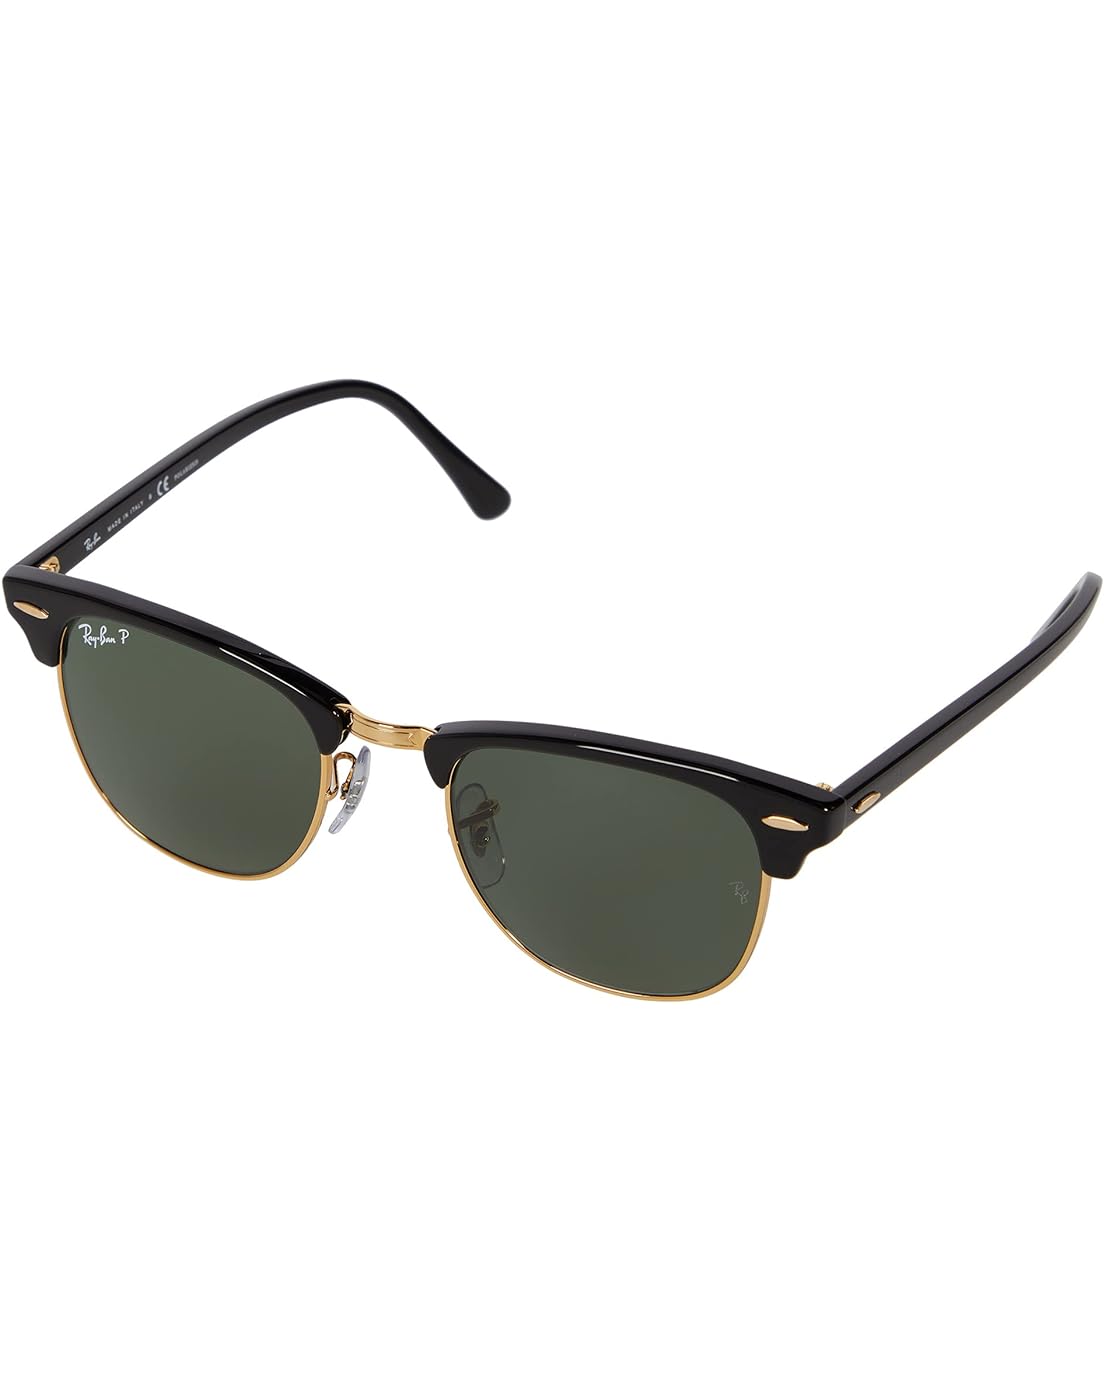 Ray-Ban RB3016 Clubmaster Polarized Sunglasses